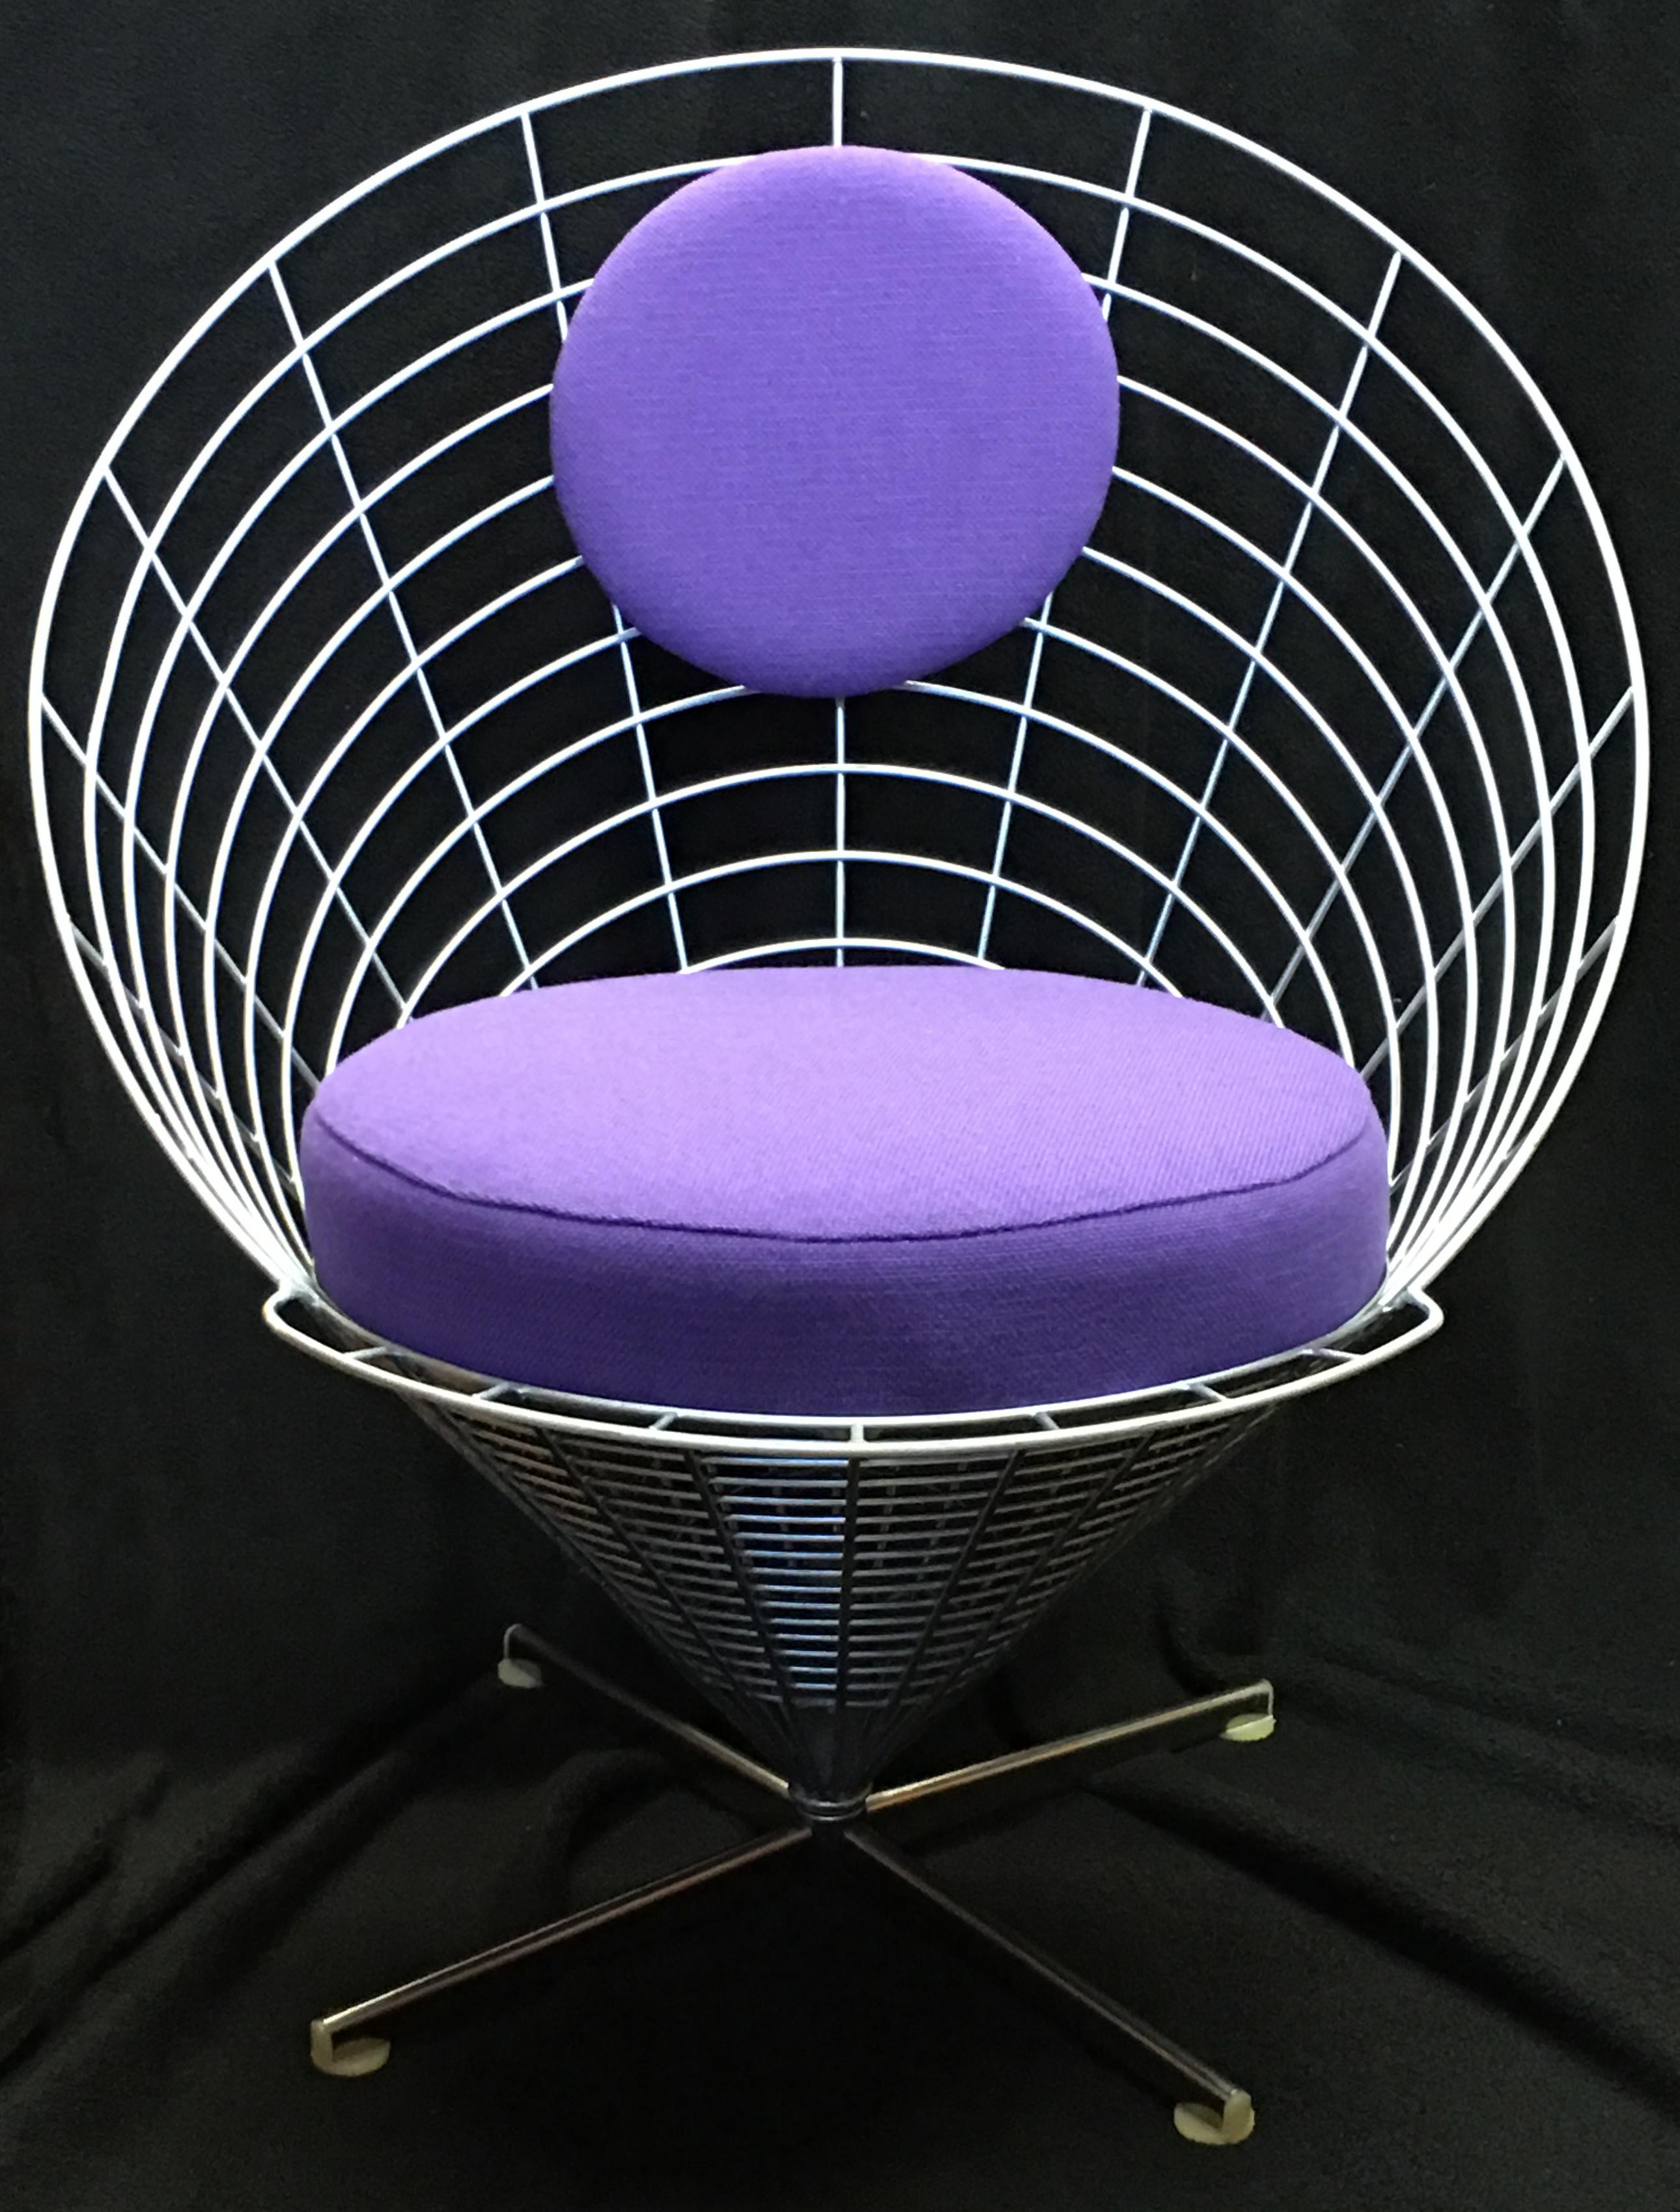 A very good original 1st Edition of Verner Panton's wire cone chair, model 'k2' with zinc plated finish. It has the original bolt and washer, which, by putting the washer the other way up, allows the chair to be locked in one position, or allowed to